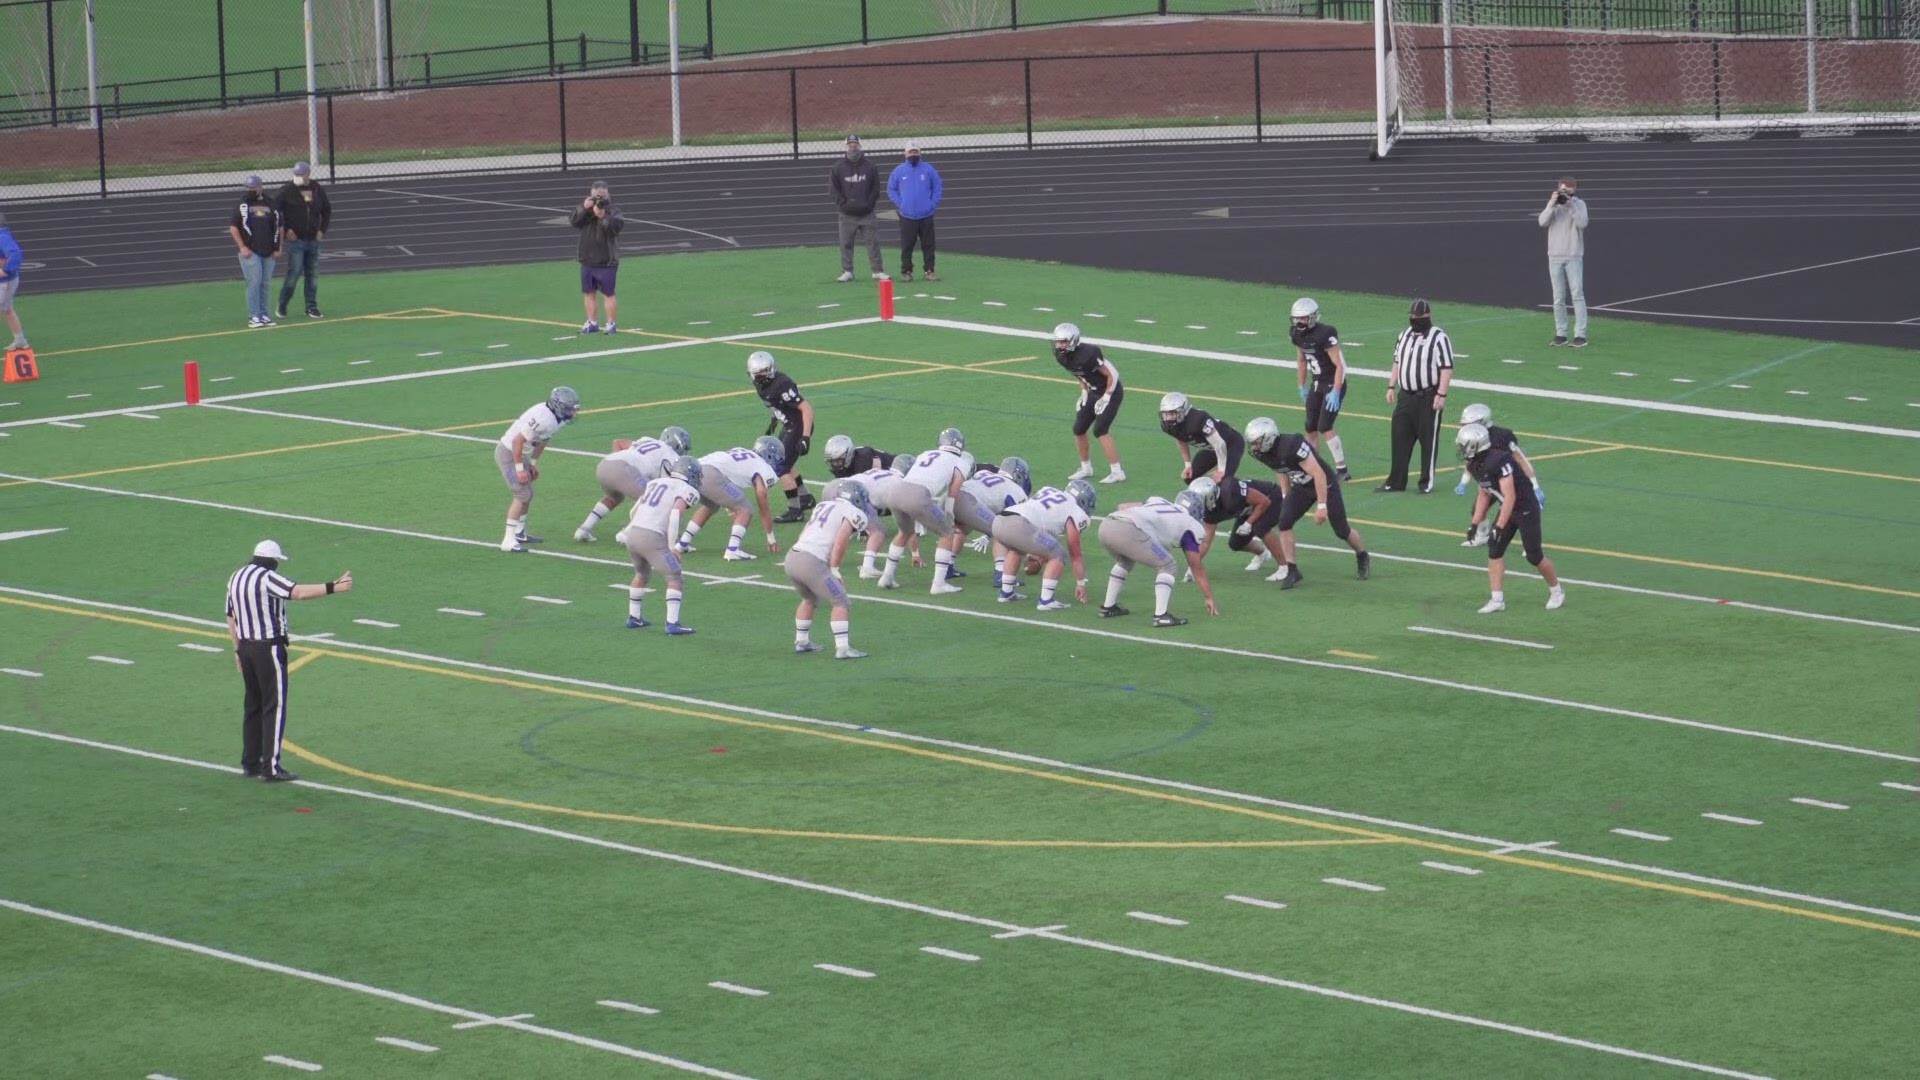 Highlights of Newberg's 34-28 win over Mountainside on April 2, 2021.